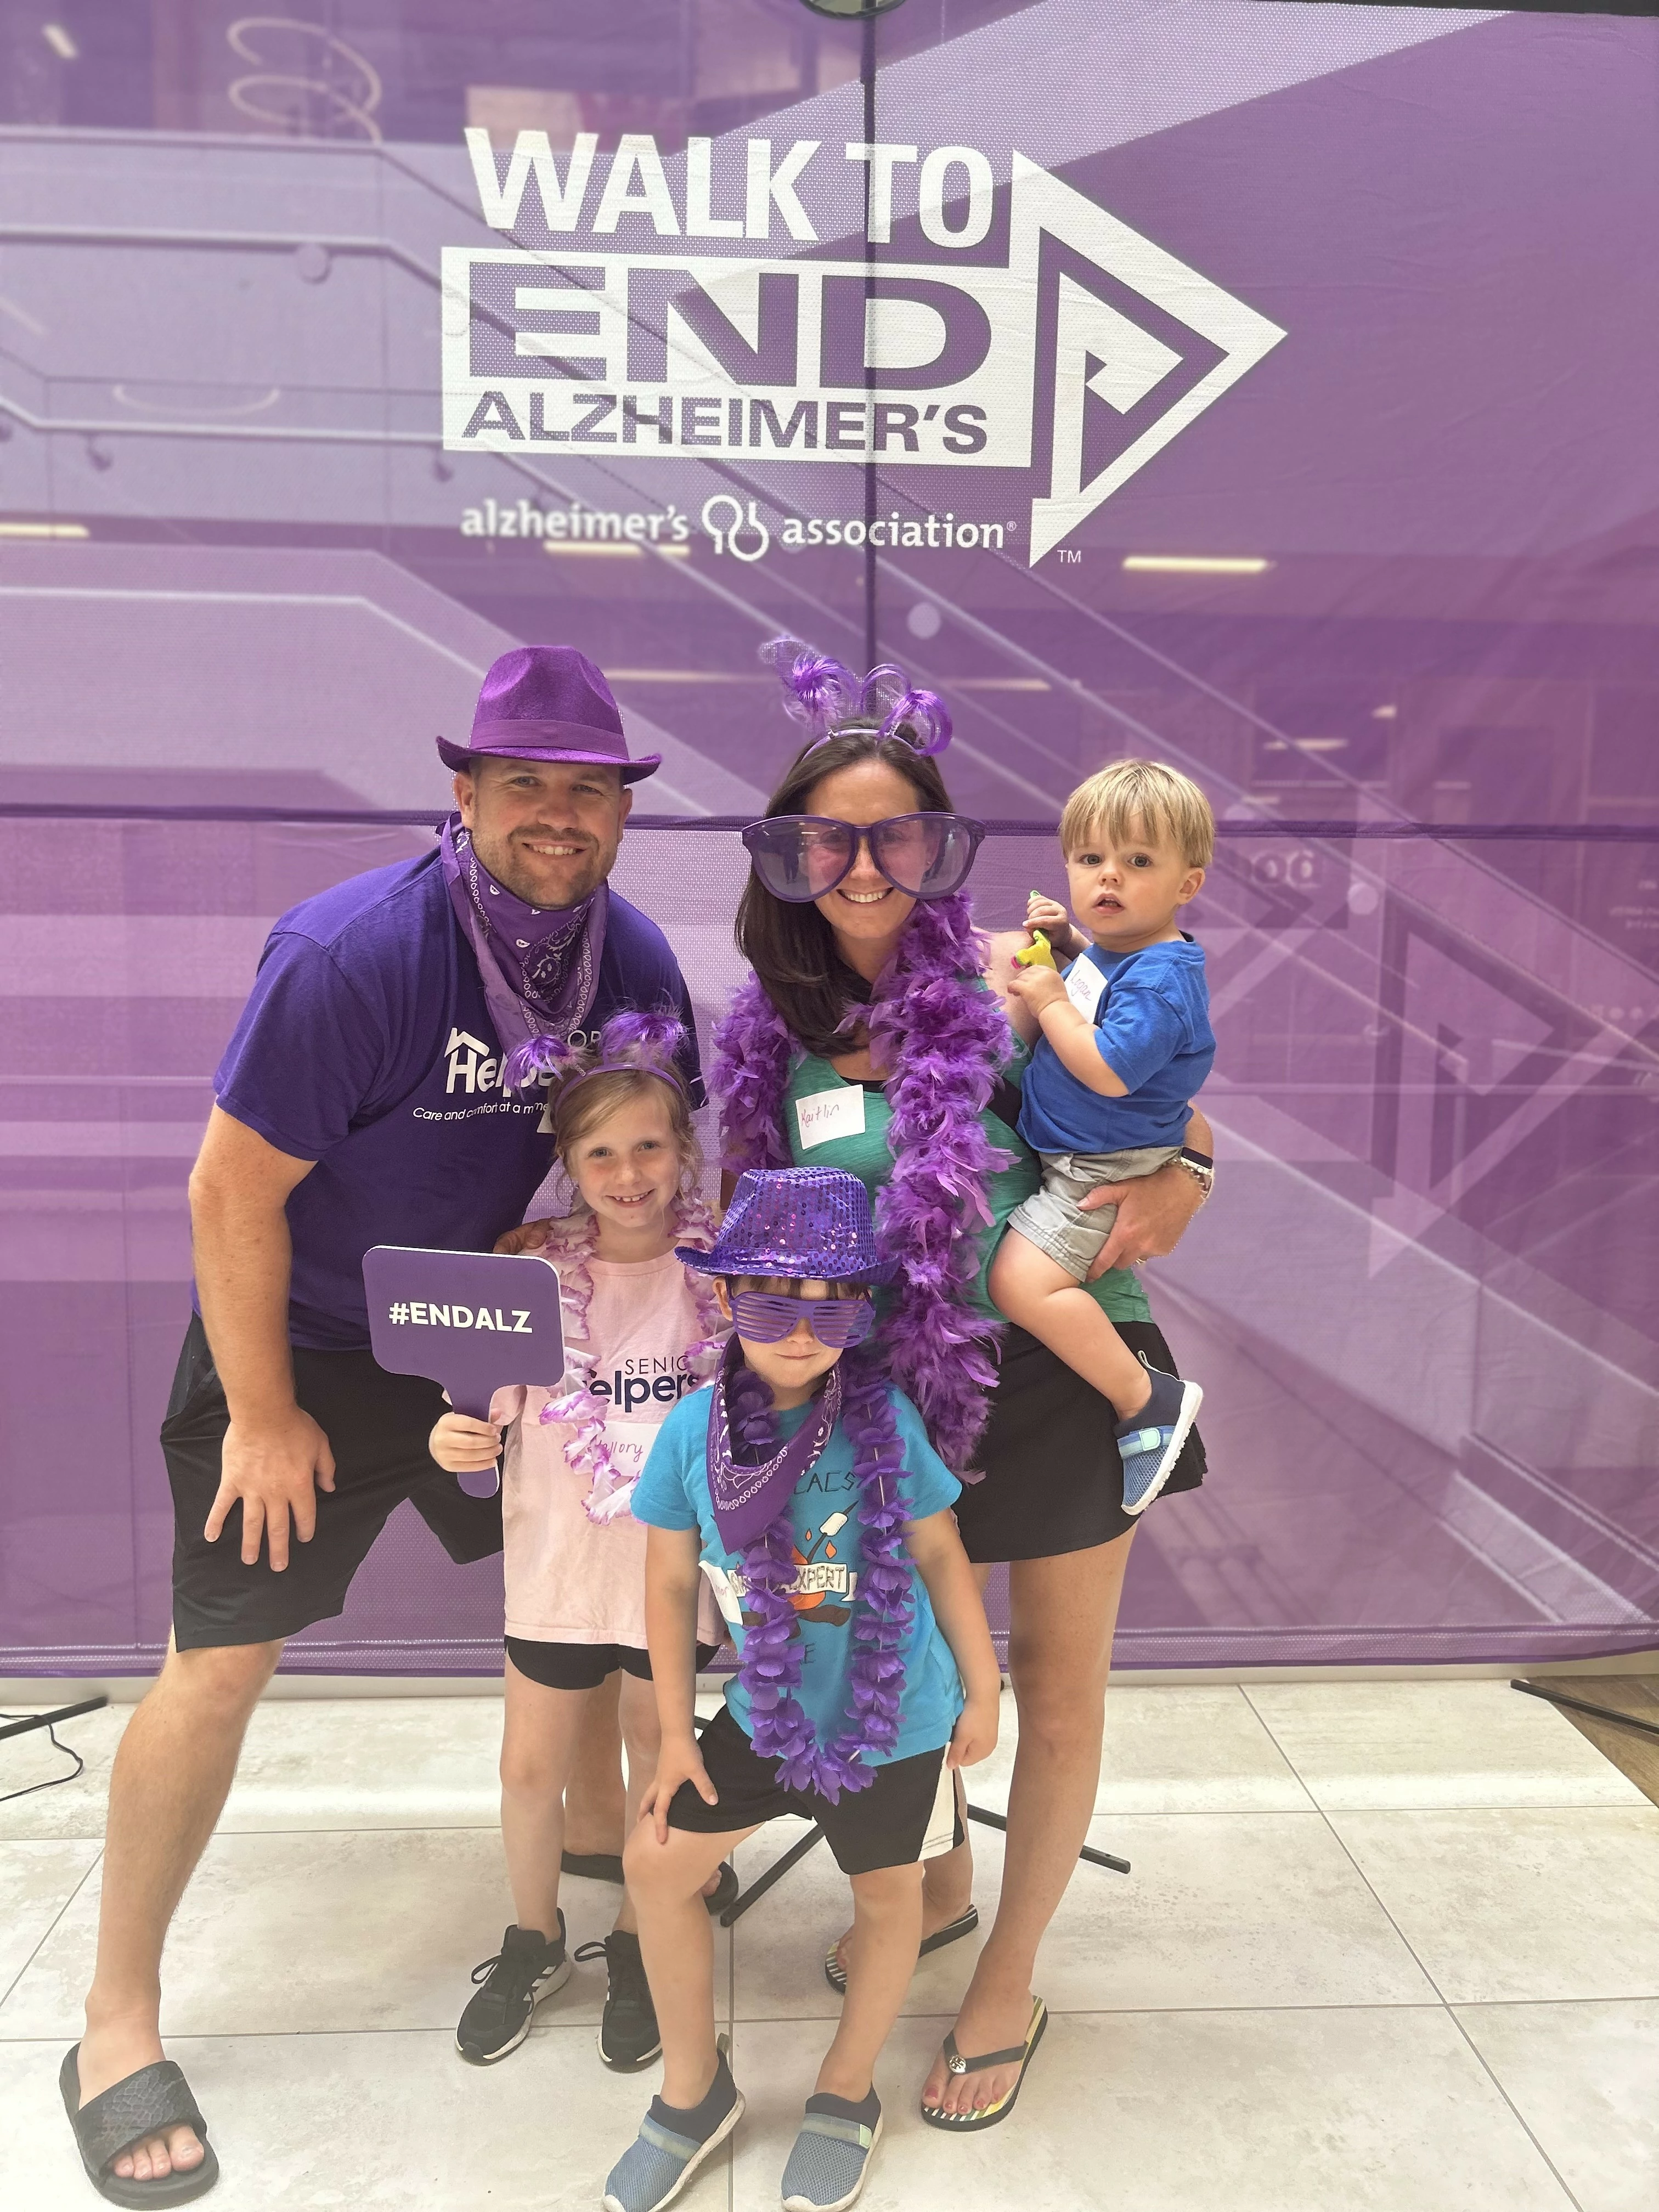 Senior Helpers of Lake Minnetonka attends the Walk to End Alzheimer's Kick Off Events! Visit our News and Blog page to learn about how you can join our team or donate.